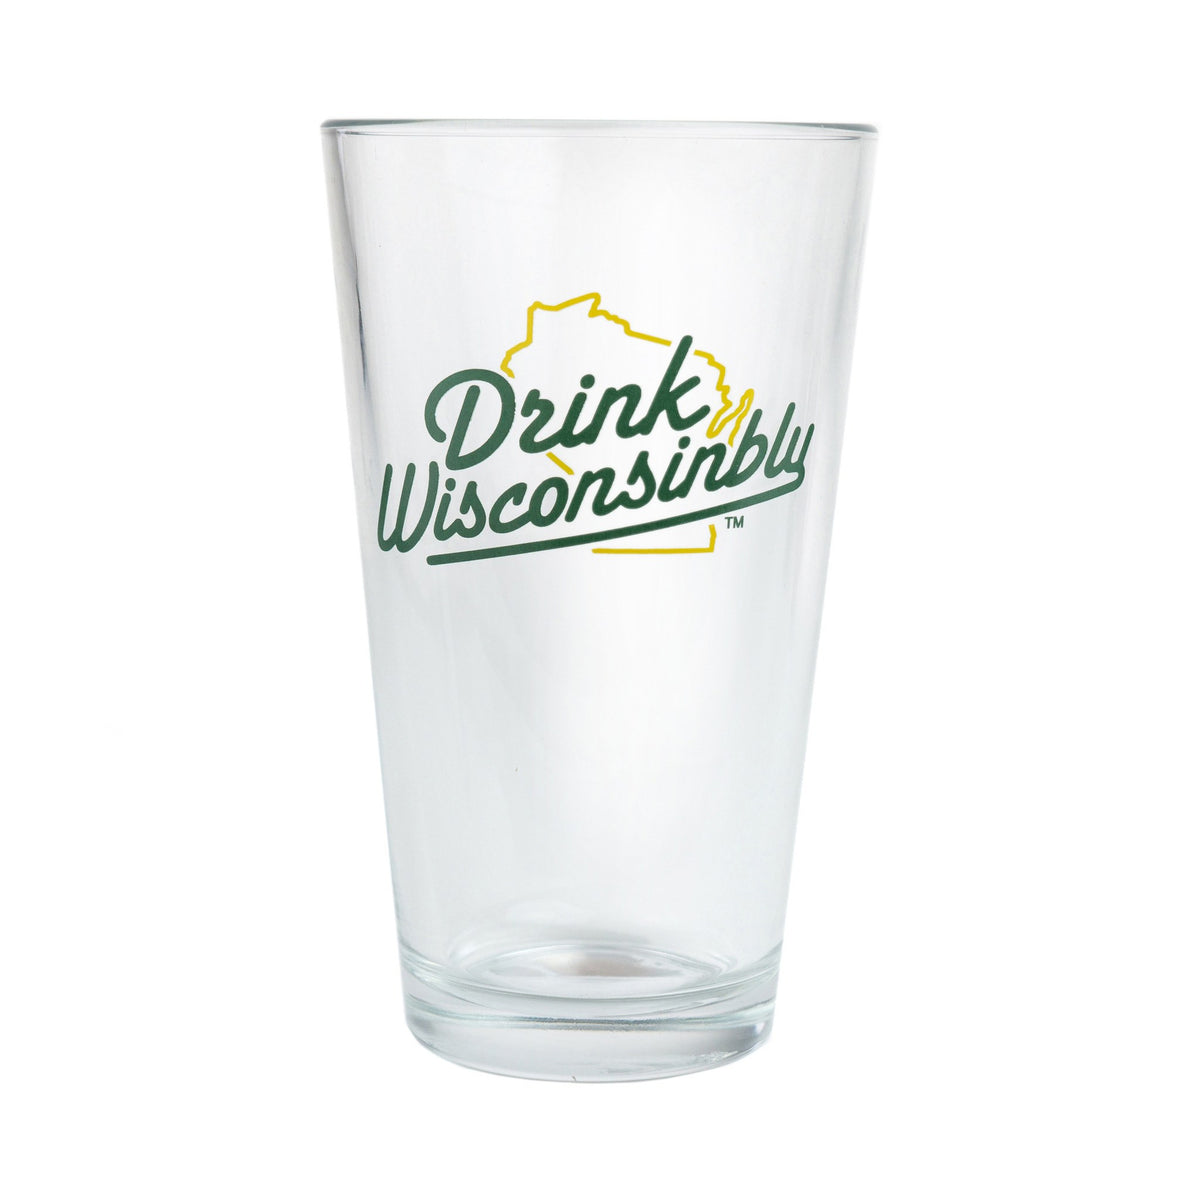 Mixed Drinks Cocktail Glass - Drink Wisconsinbly